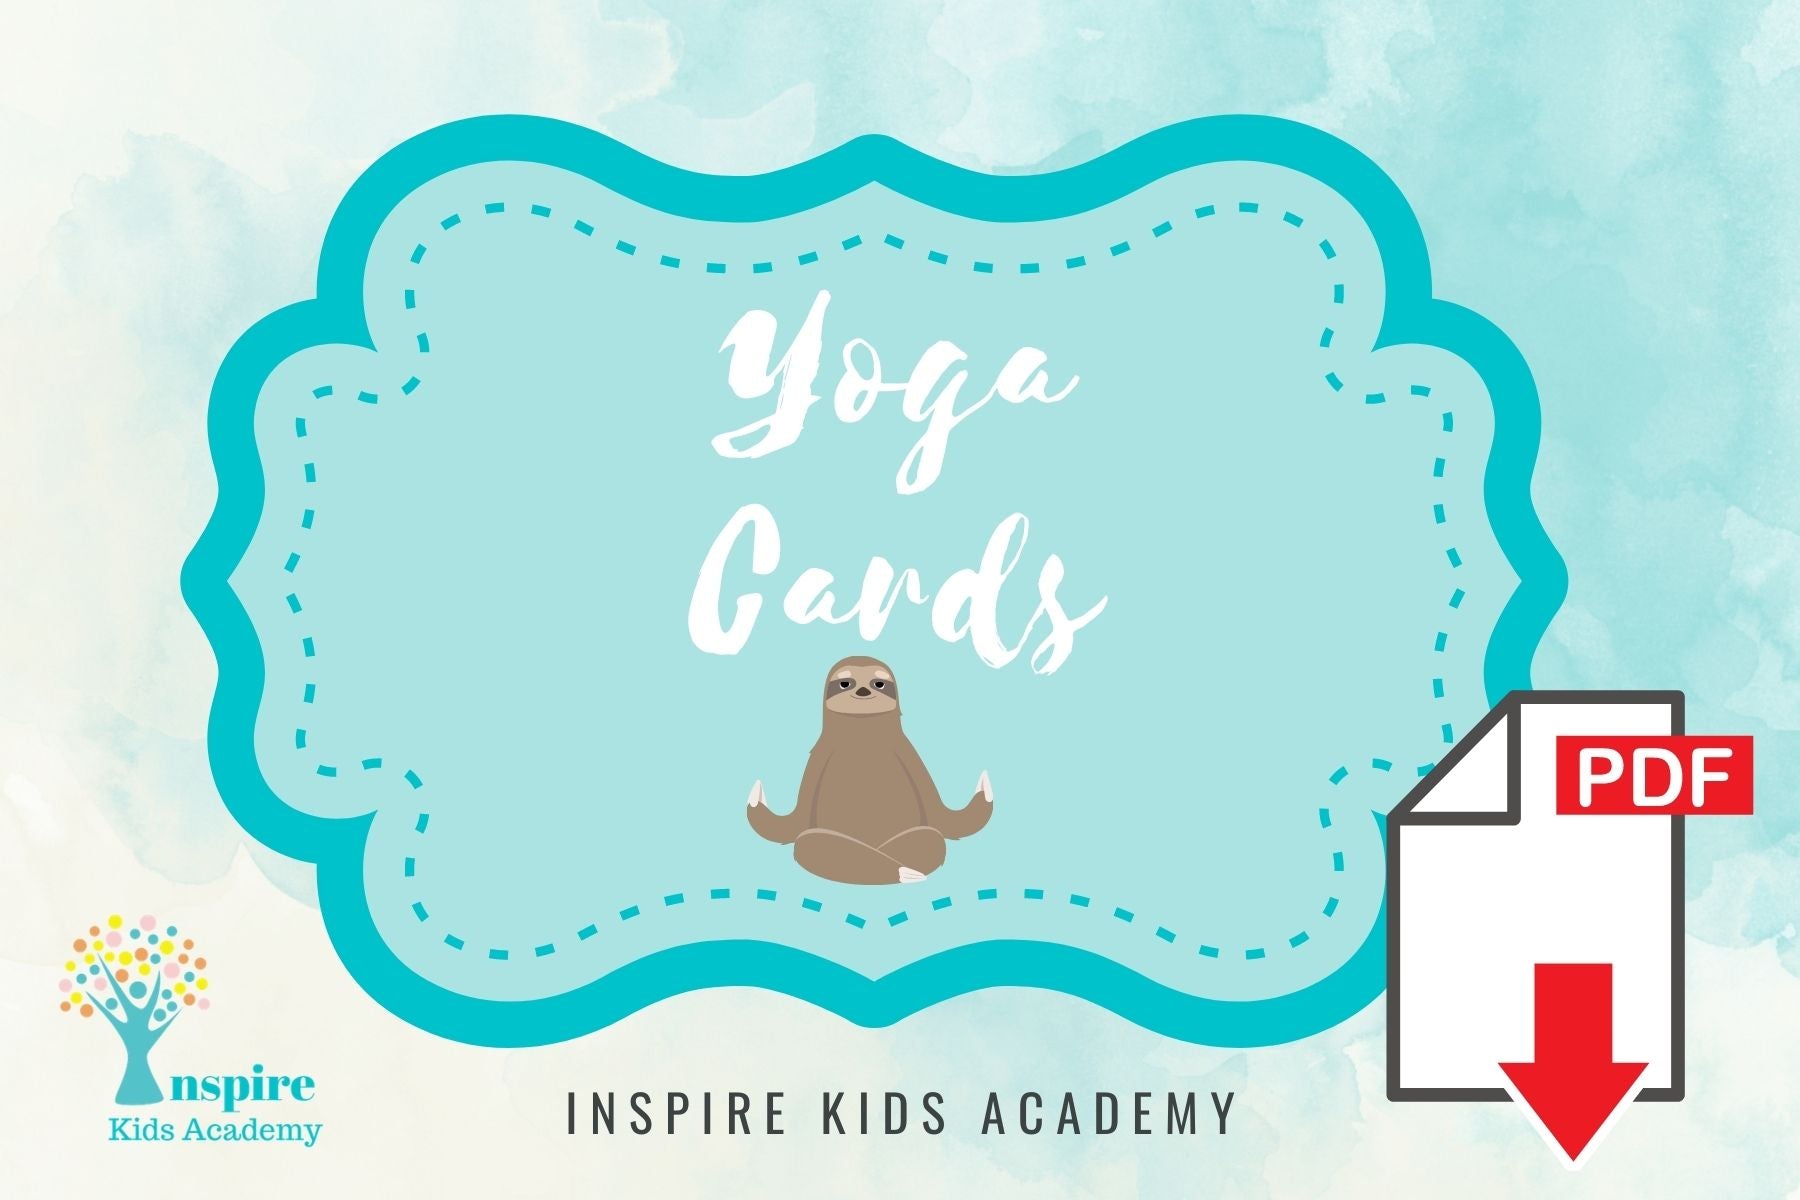 Yoga Visuals Starter Kit (Printable PDF) – AdaptEd 4 Special Ed, Inc.